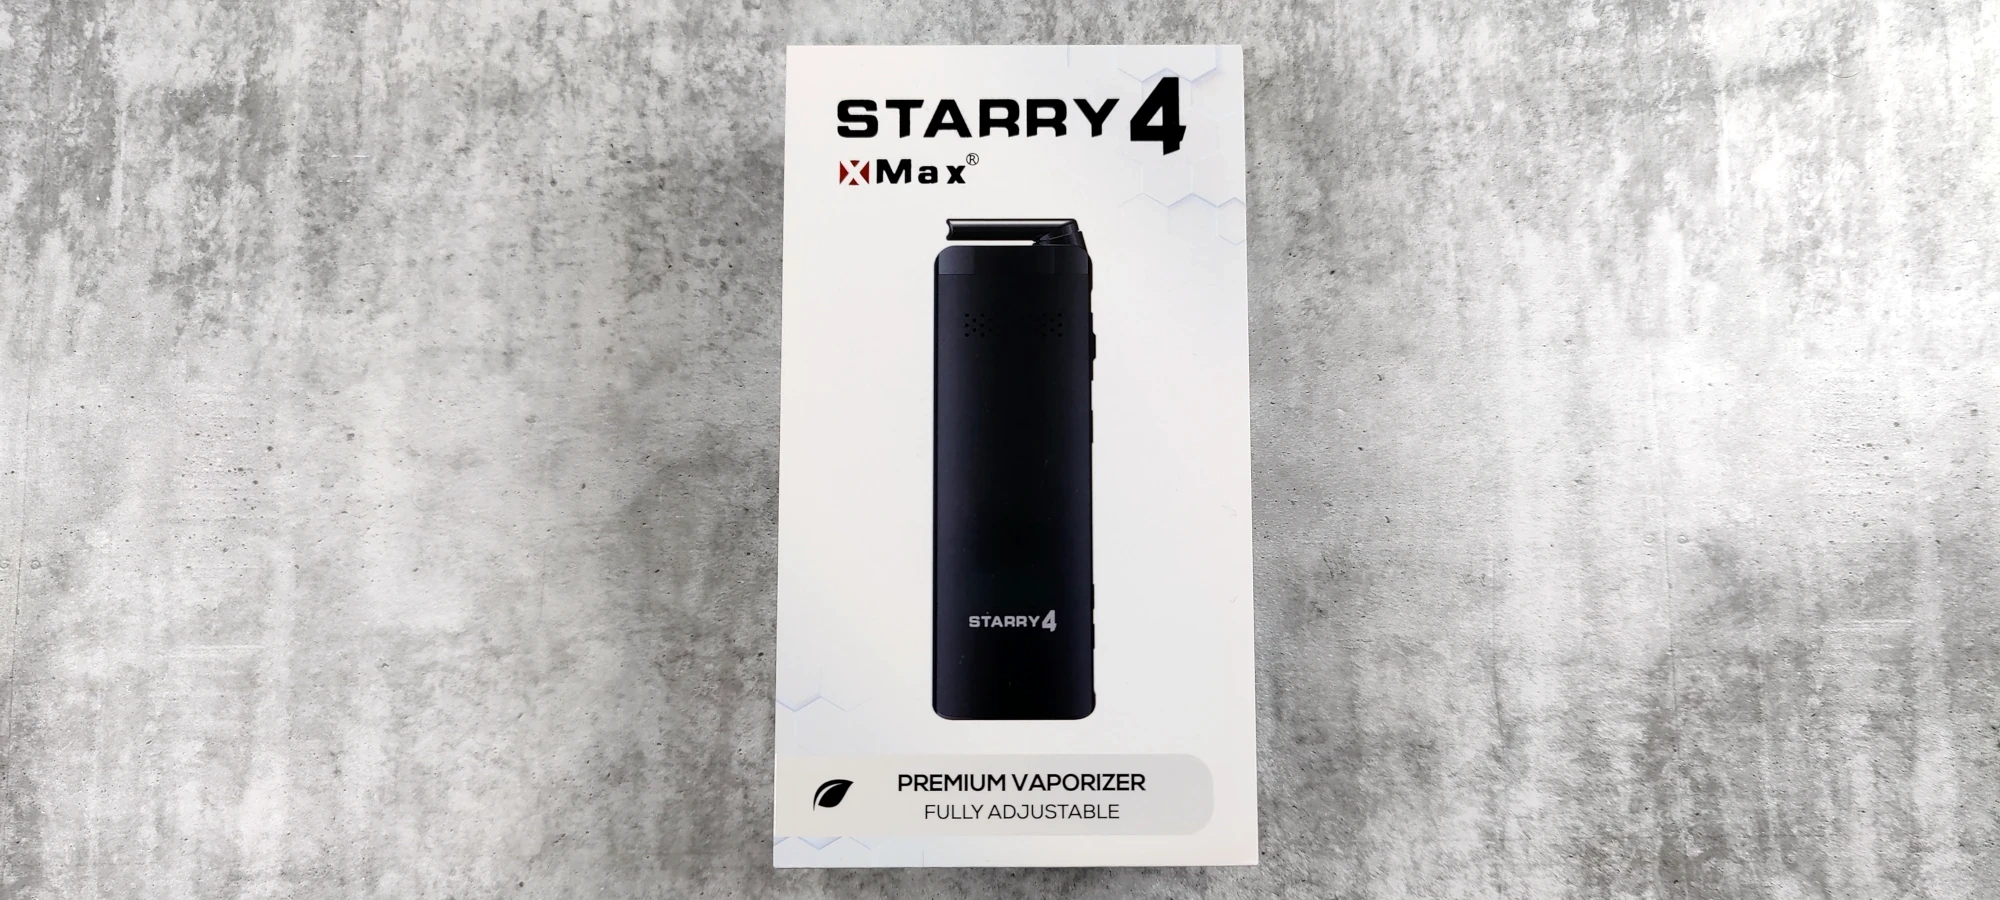 XMAX Starry 4 in retail packaging